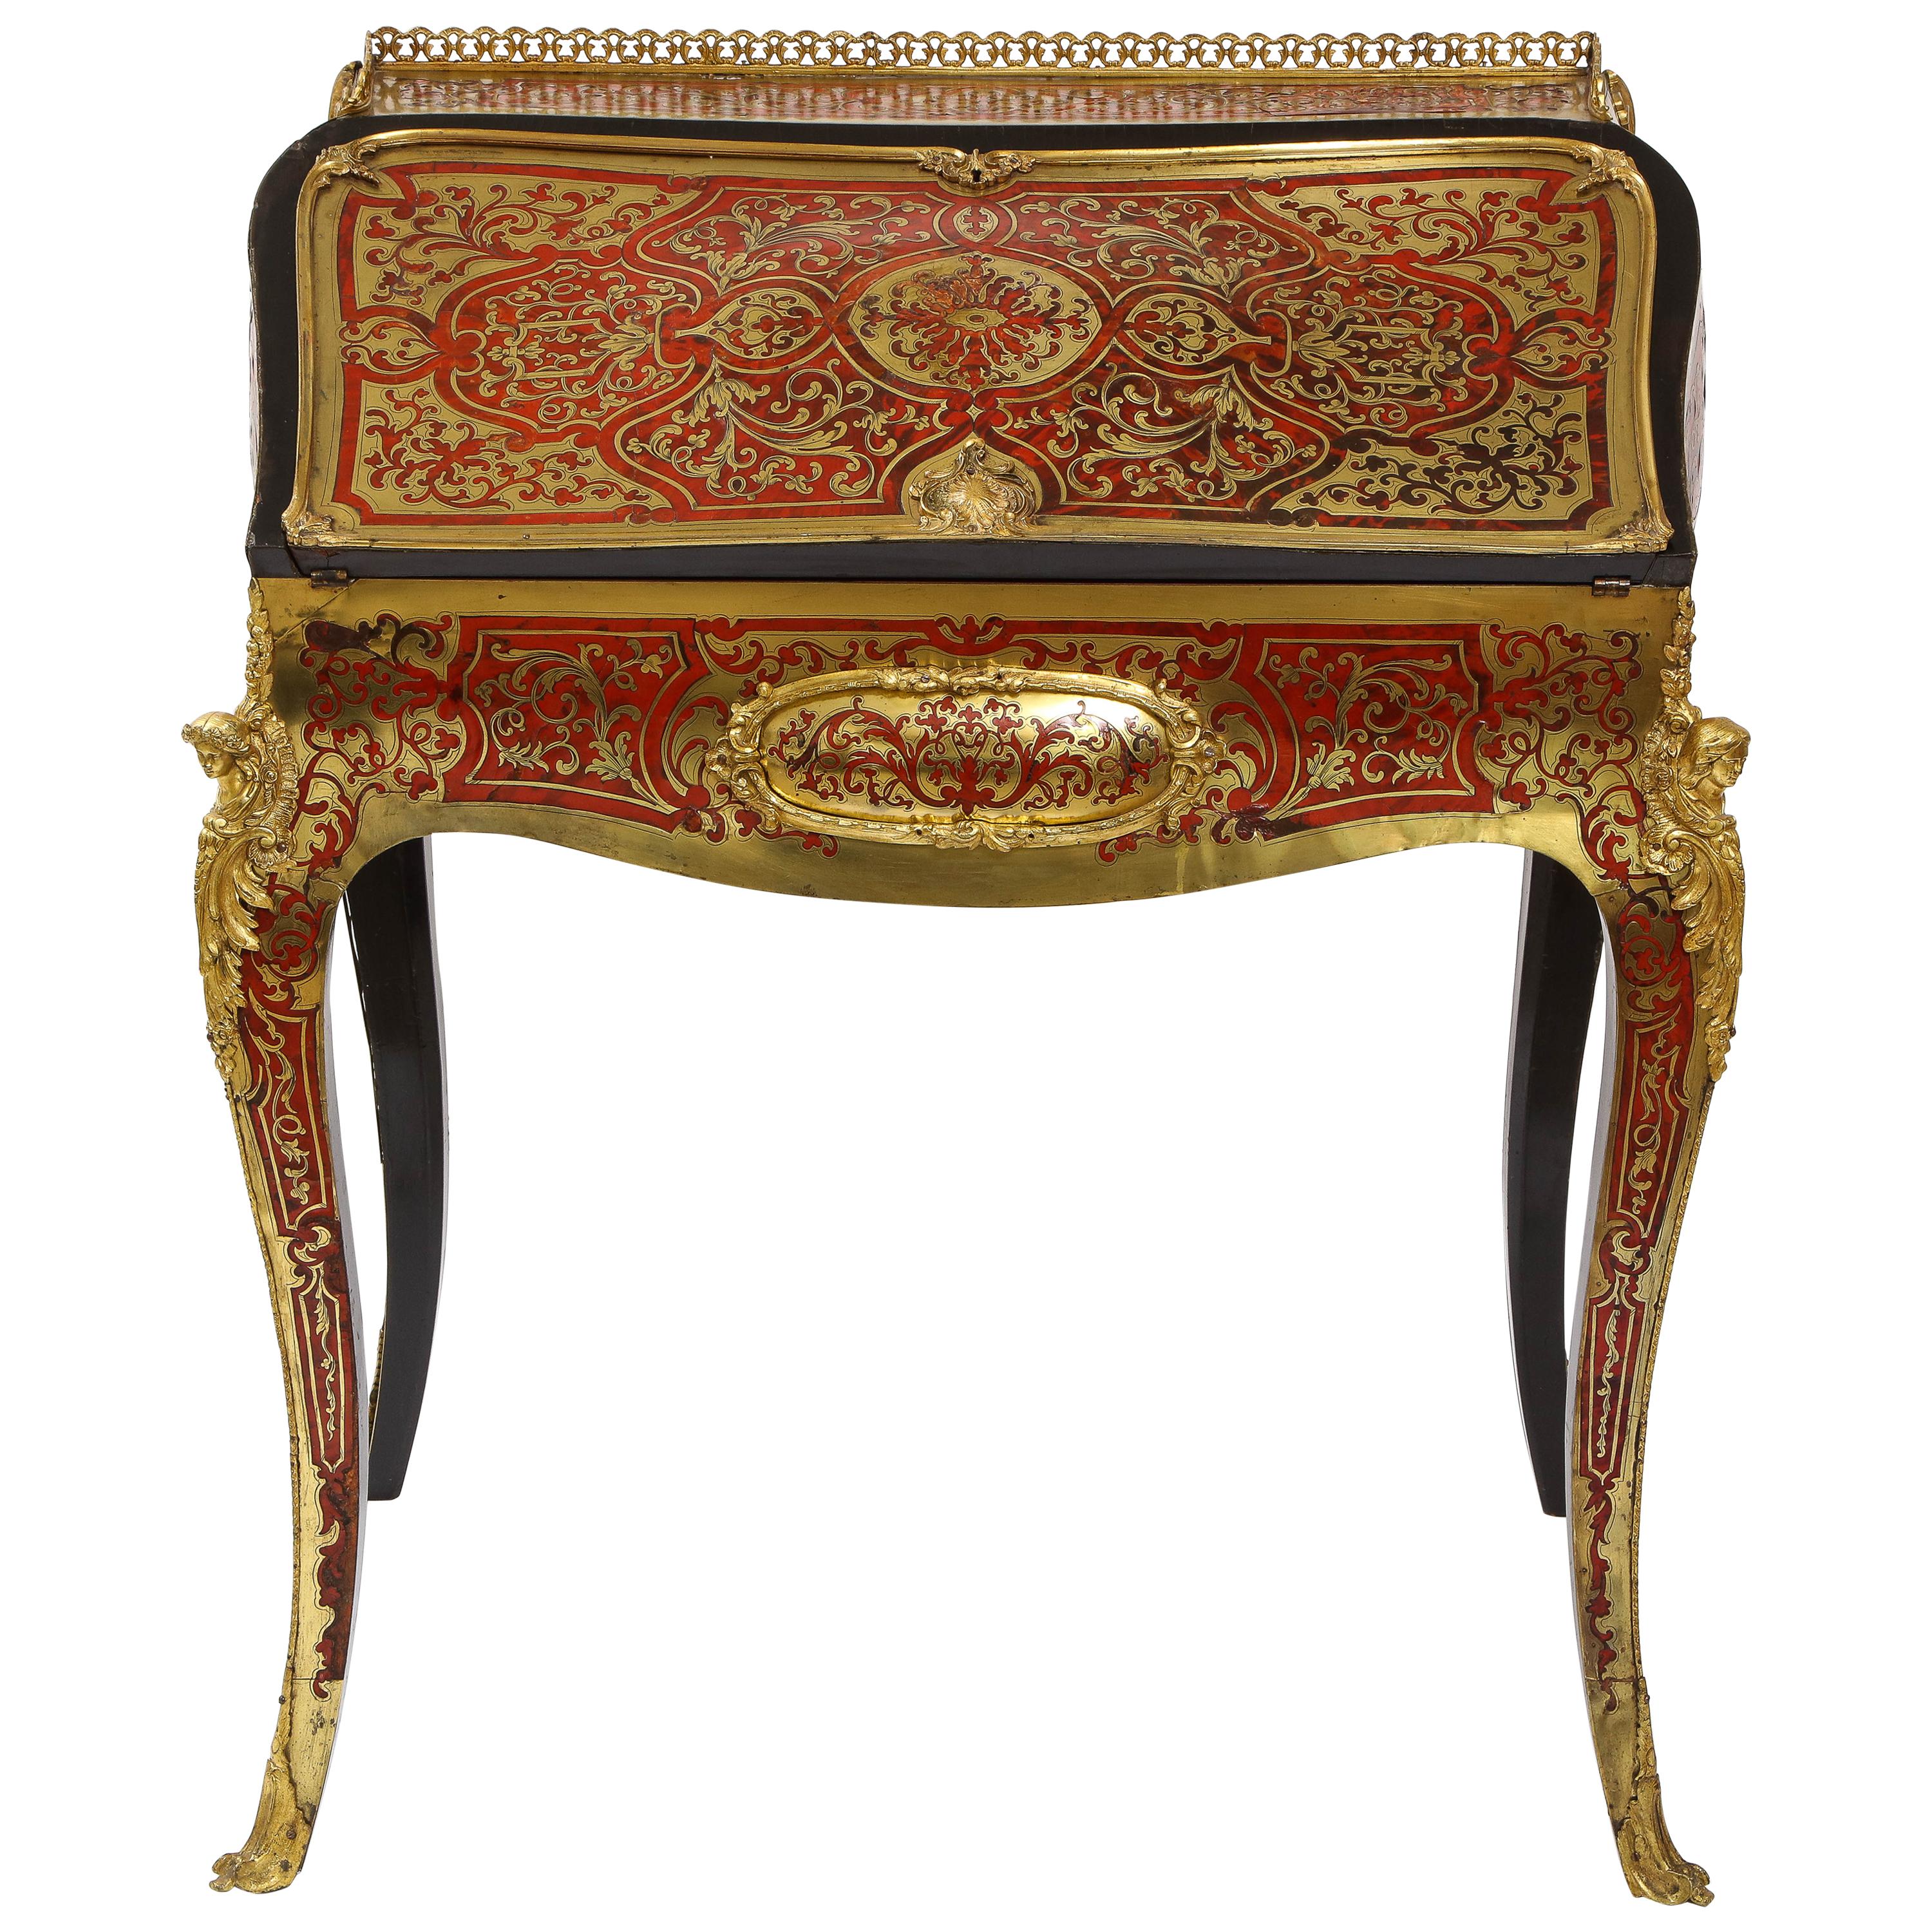 A gorgeous Louis XV style French dore bronze mounted Boulle Marquetry secretary desk or cabinet. With a cylindrical form in ebonized veneer and boulle with dore bronze mounts on a gorgeous red and orange swirling boulle veneer ground. The legs are